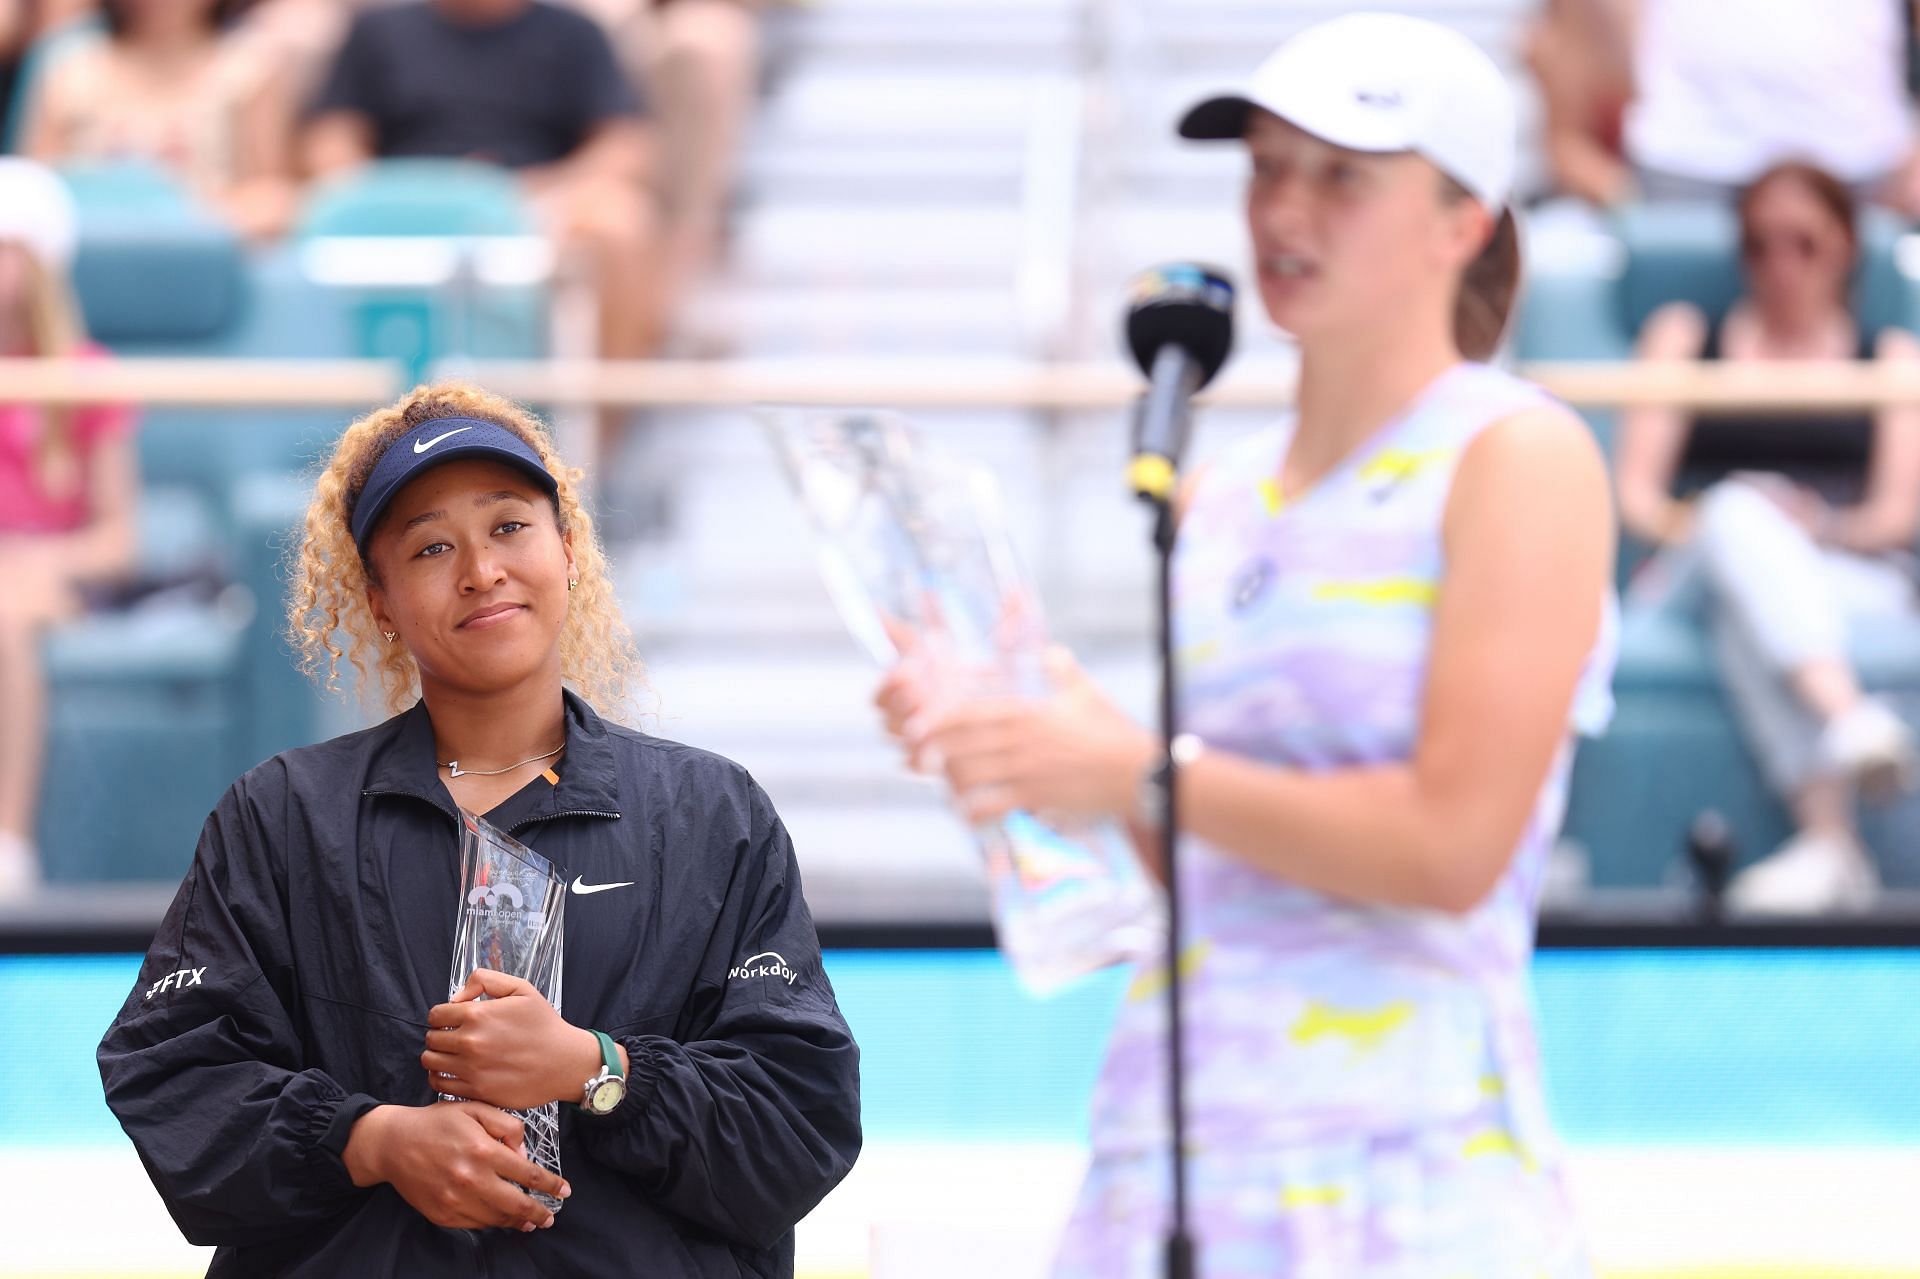 Miami Open runner-up Naomi Osaka looks on with a smile as champion Iga Swiatek delivers her speech